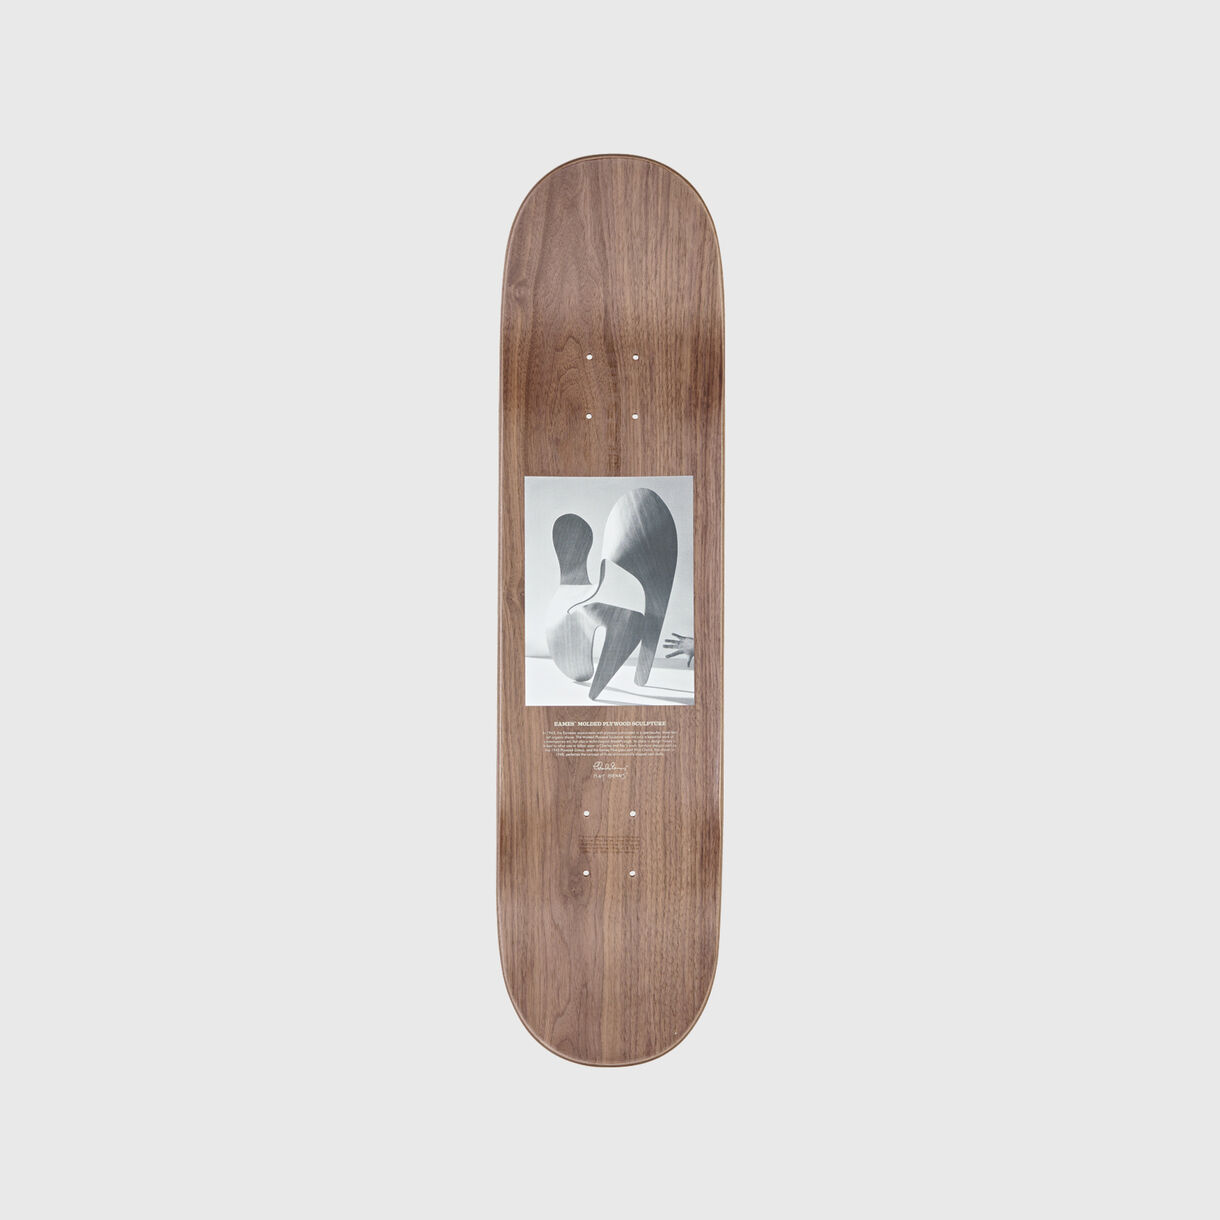 Eames Silhouette Deck - Plywood Sculpture